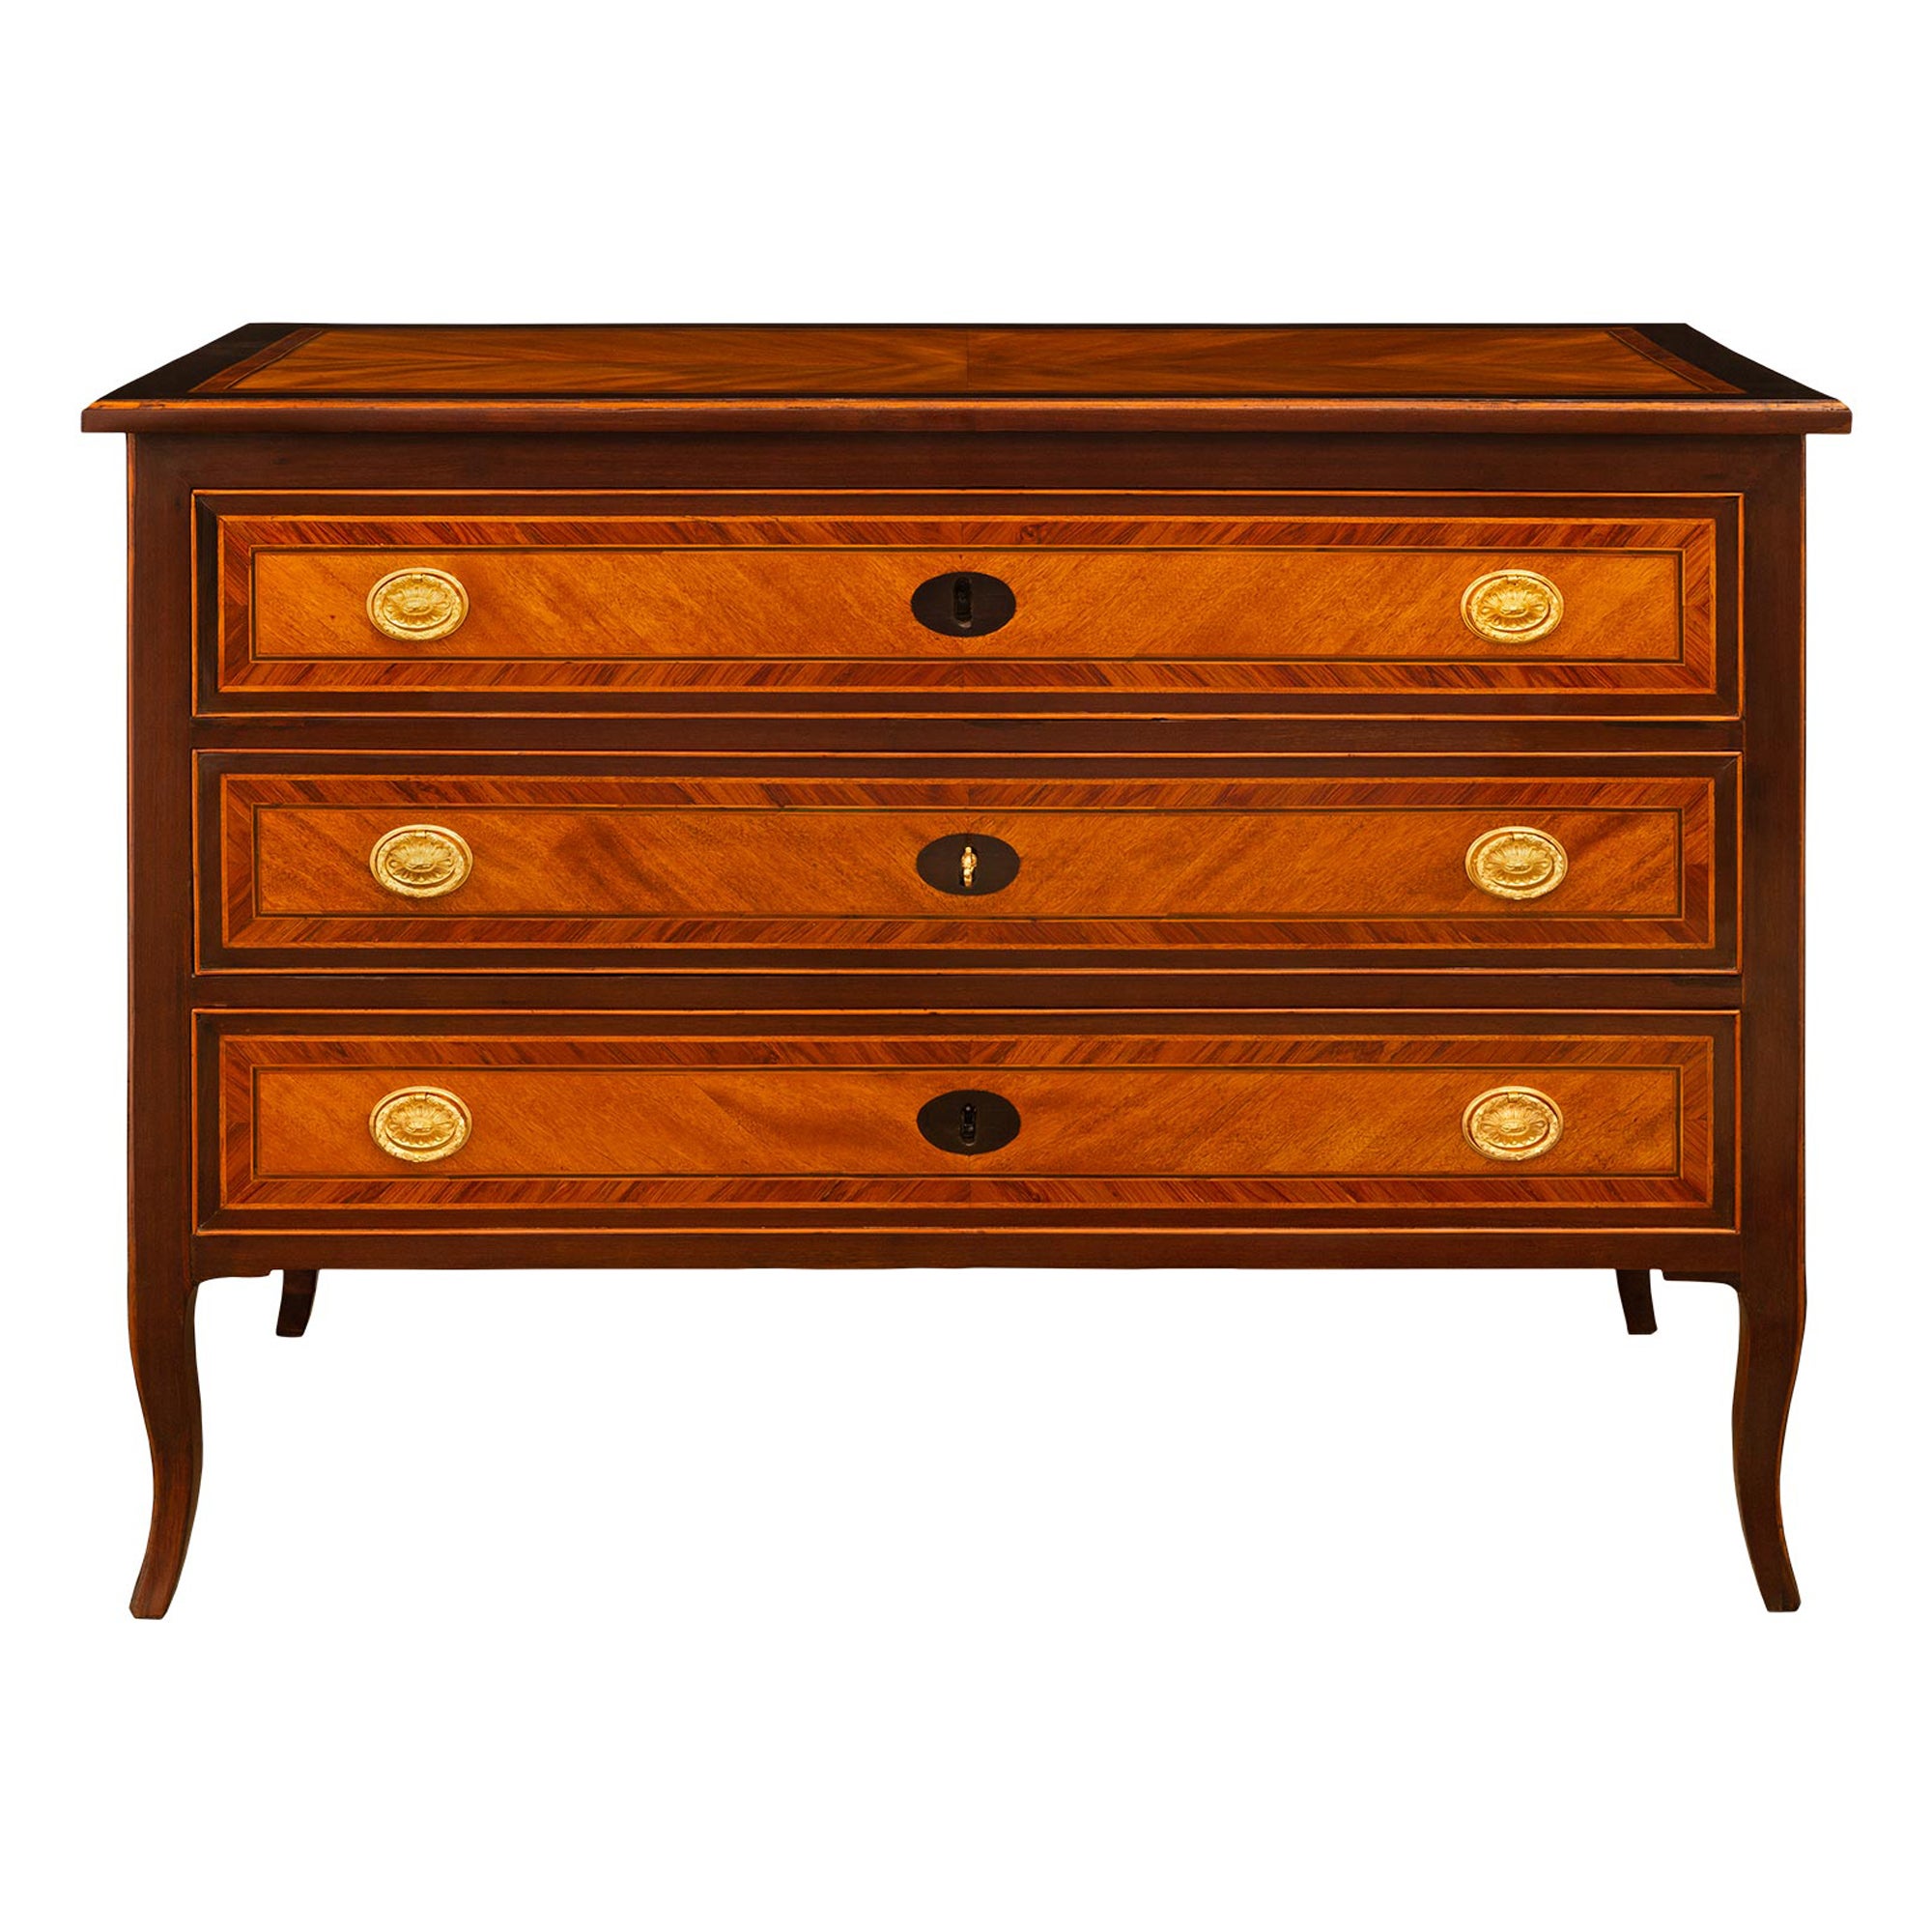 Italian Transitional Period Mahogany, Tulipwood, Cherrywood And Ormolu Commode For Sale